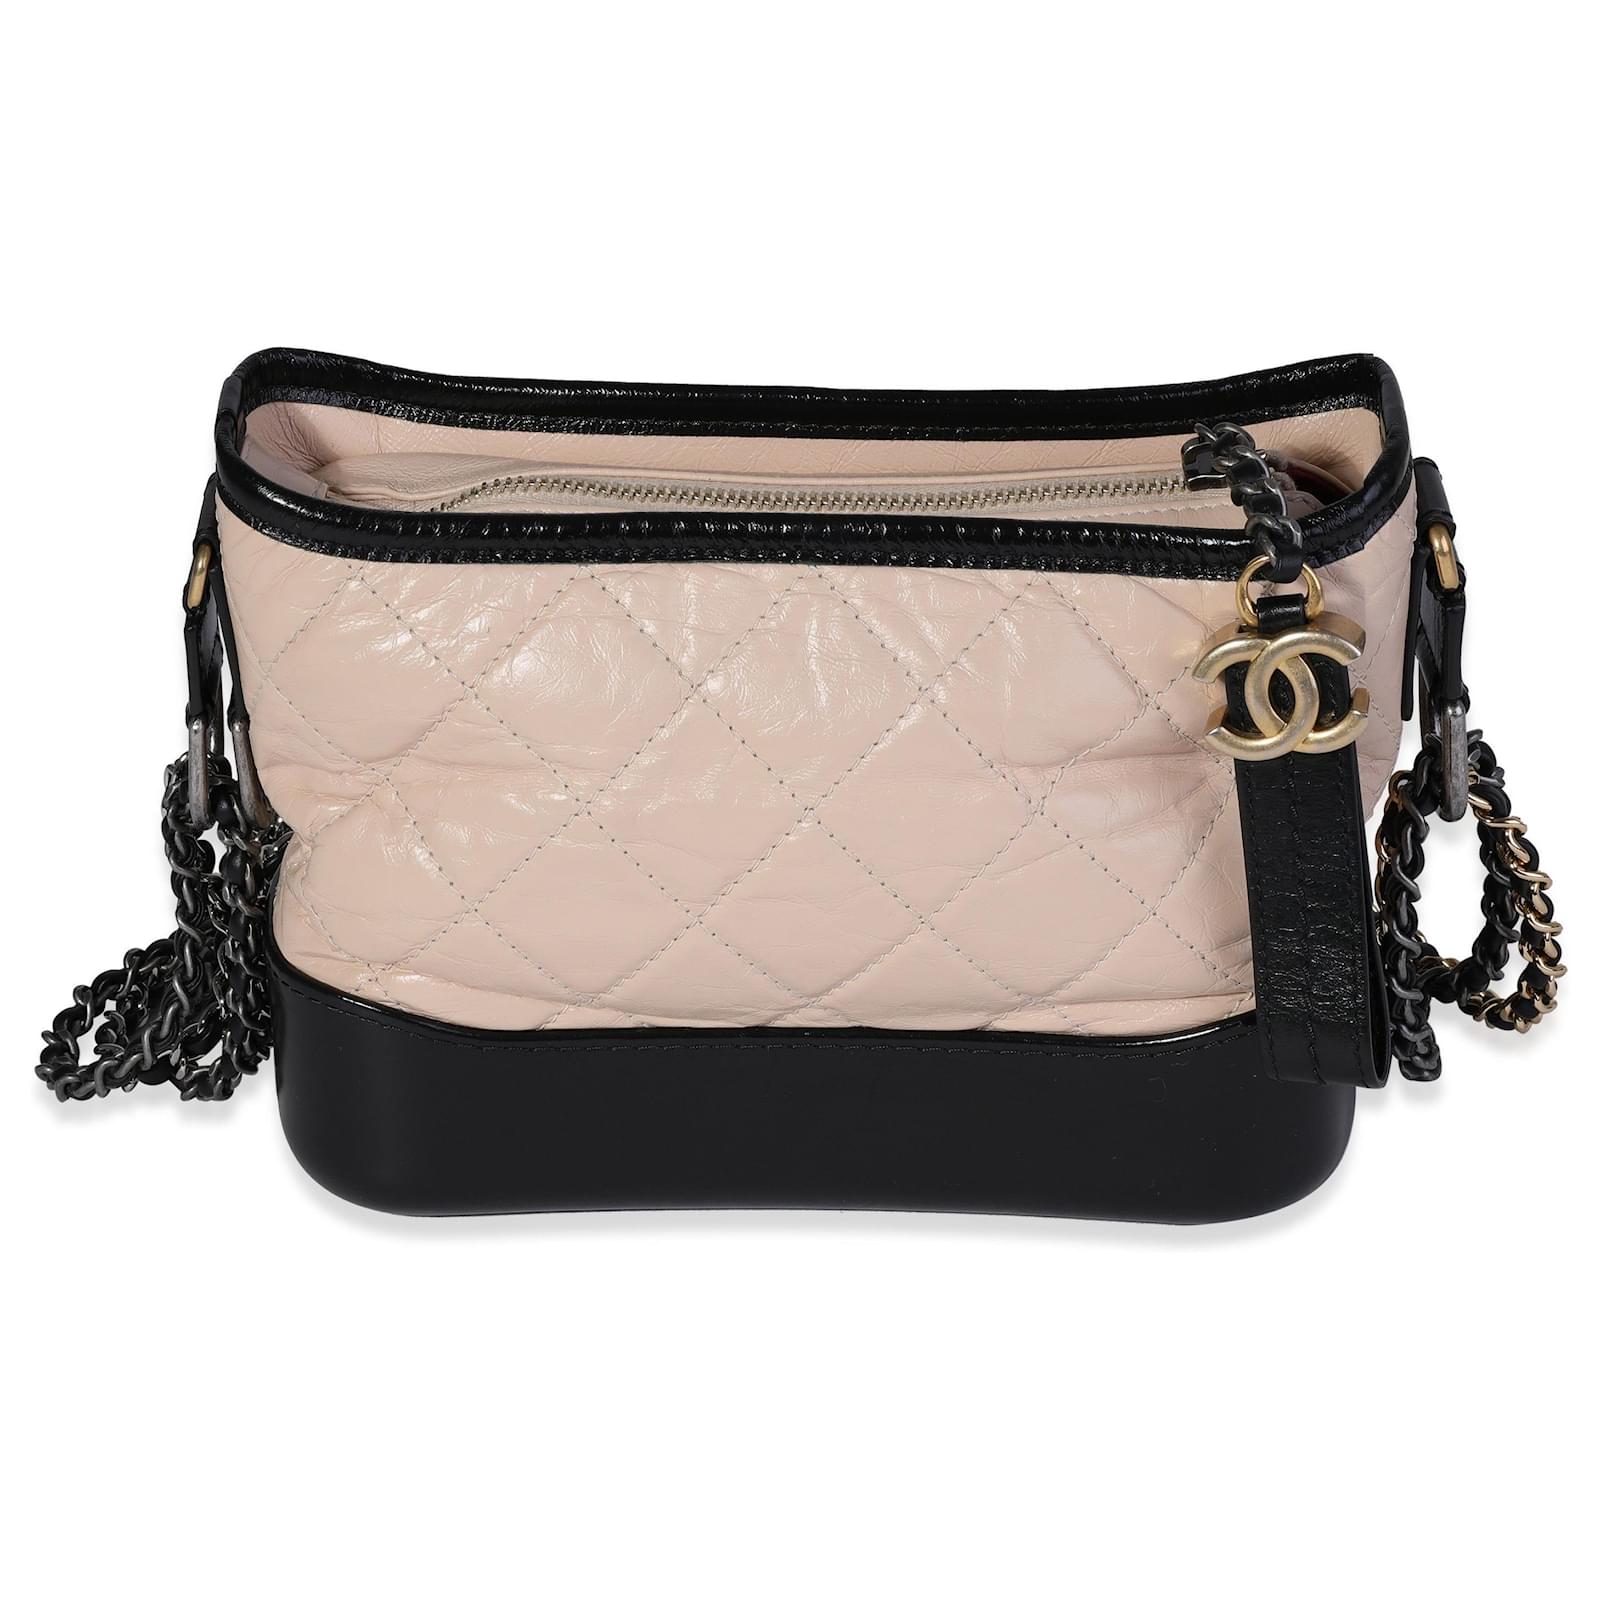 Chanel Gabrielle Hobo Quilted Aged Calfskin Small